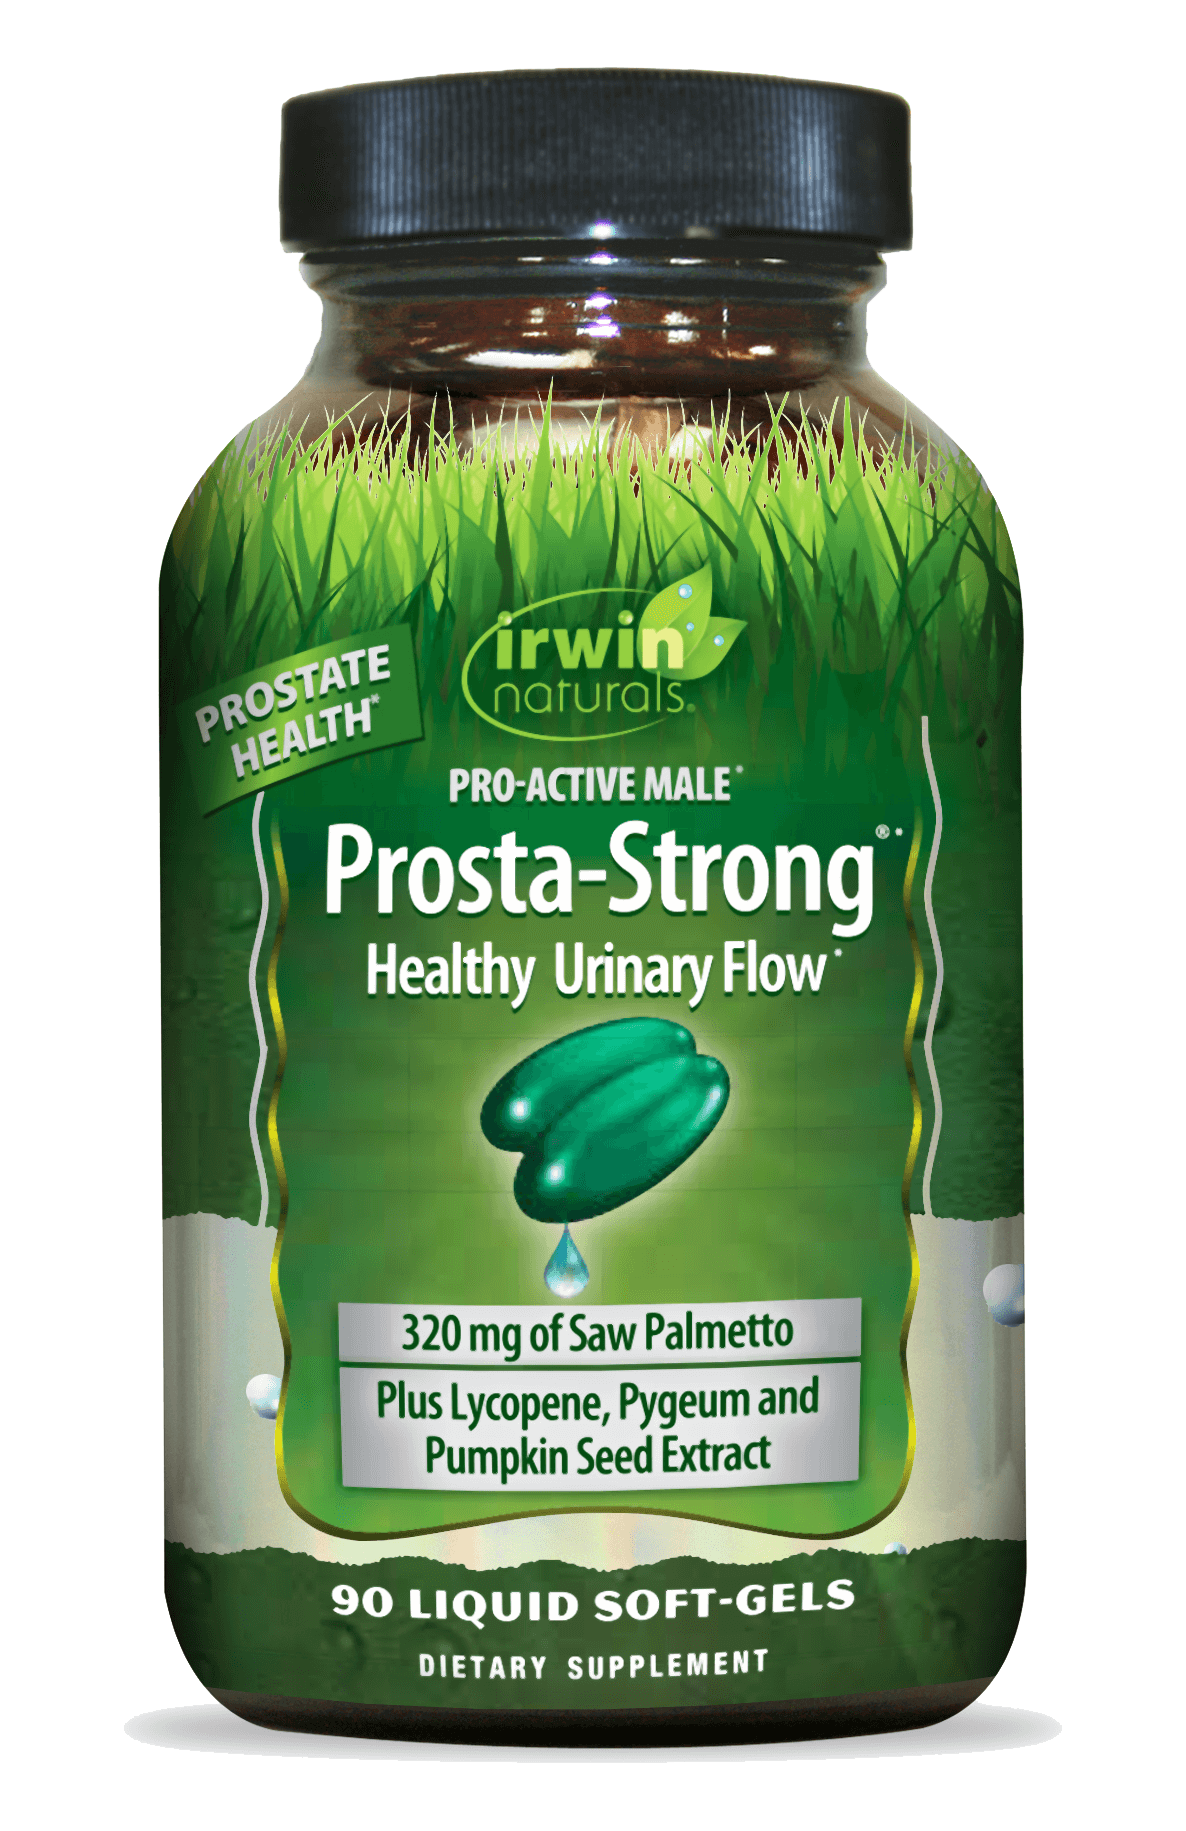 Pro Active Male Prosta Strong Healthy Urinary Flow by Irwin Naturals